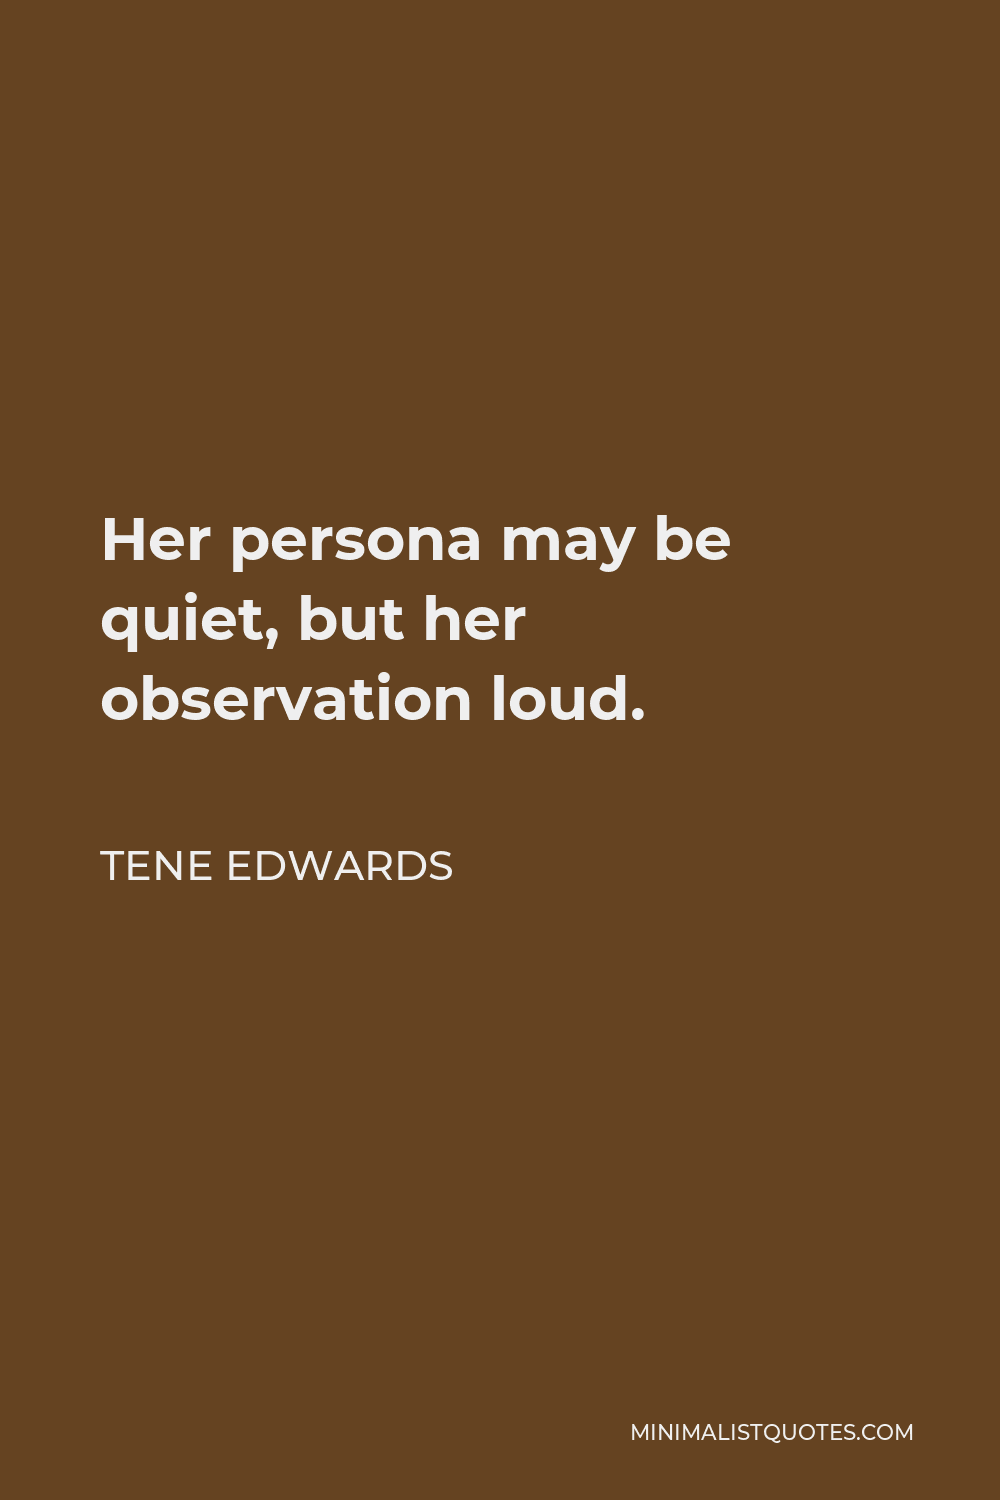 Tene Edwards Quote - Her persona may be quiet, but her observation loud.